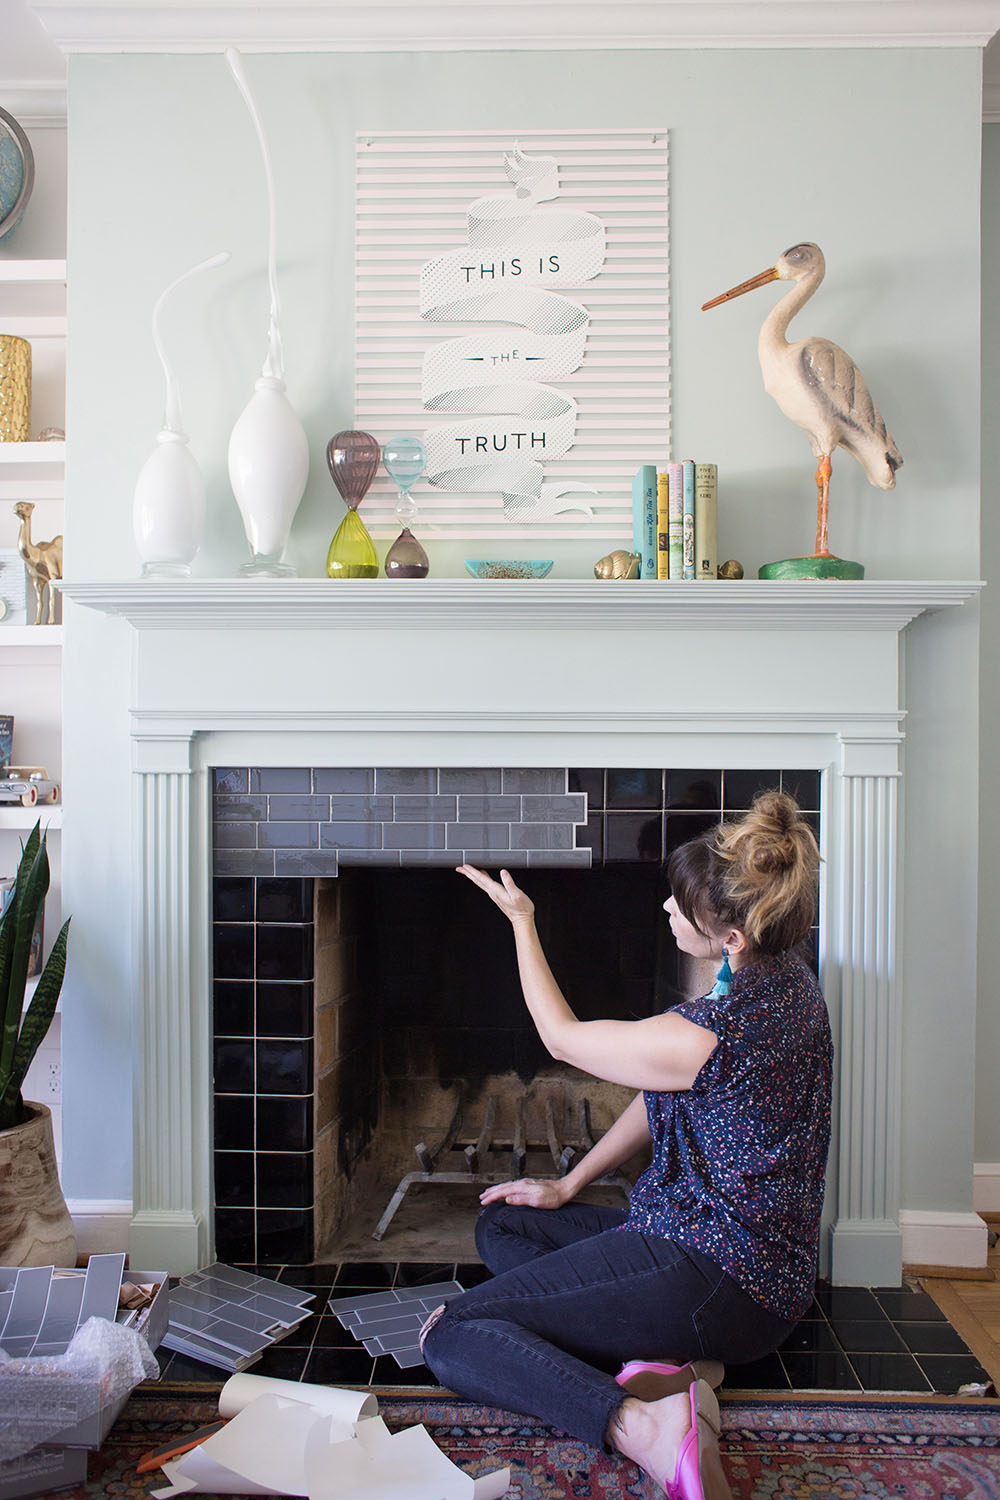 Diy Tile Fireplace Makeover, What Tile Adhesive To Use In Fireplace